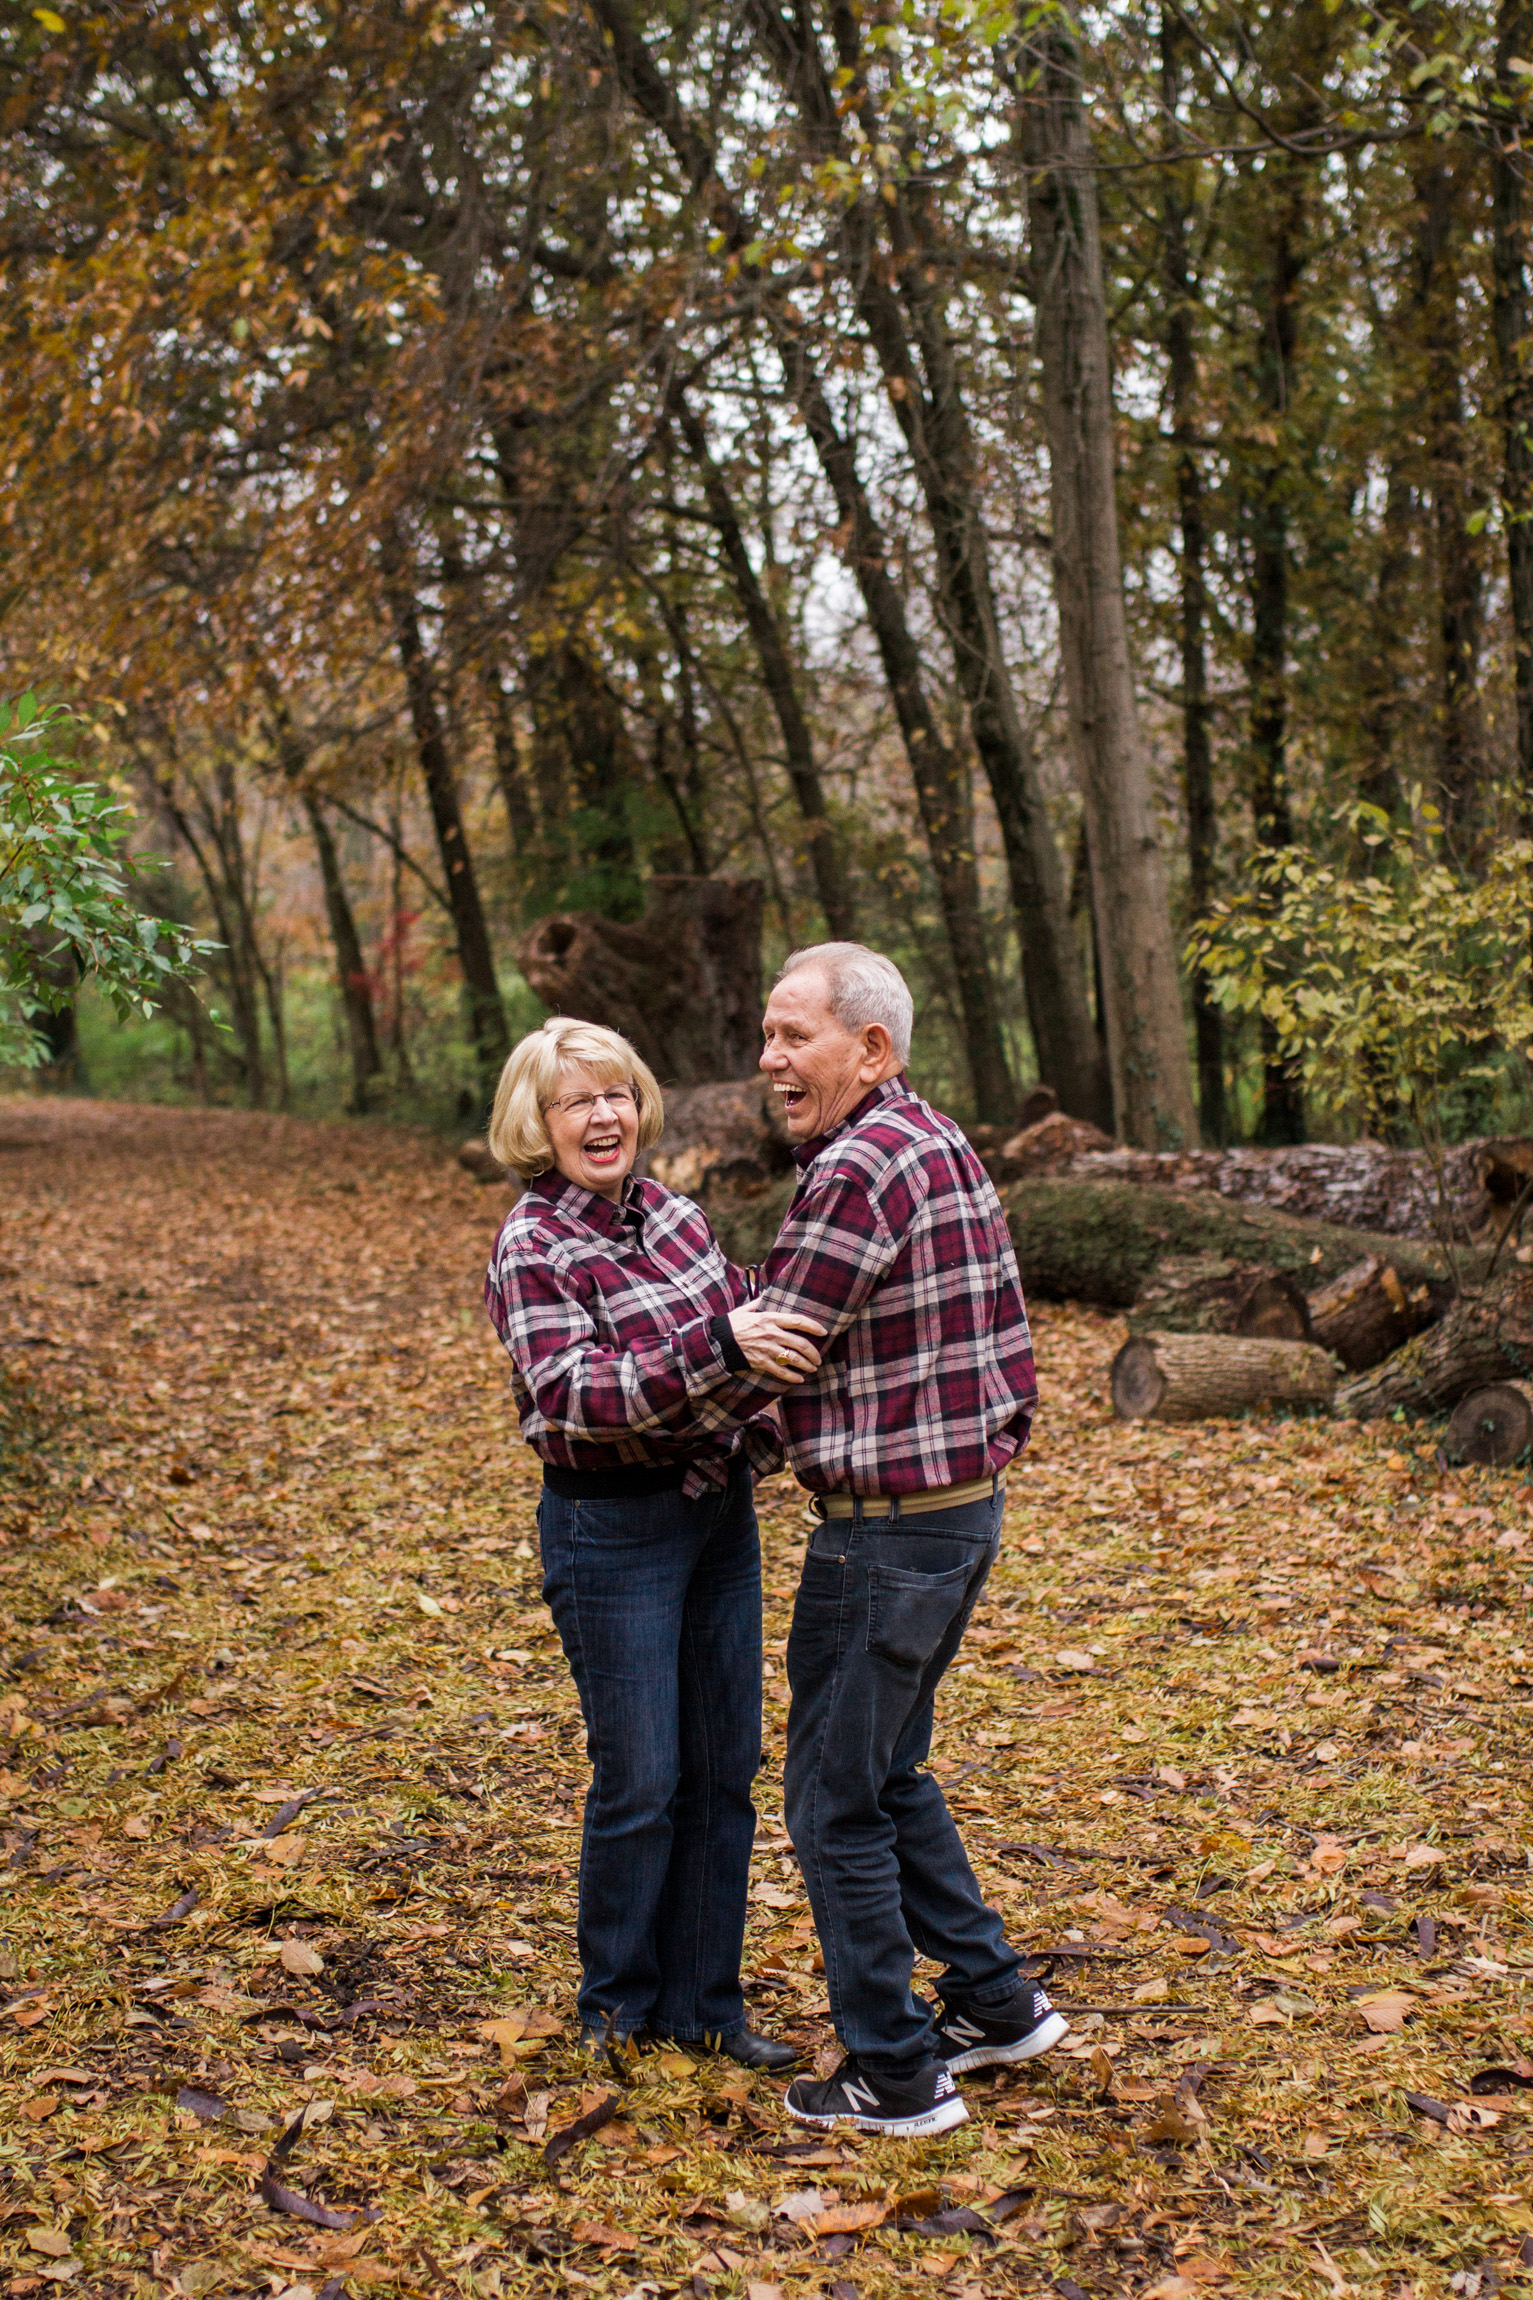  Kansas City lifestyle photographer, Kansas City family photographer, extended family session, fall family photos in the woods, older couple dancing, grandparents portrait 